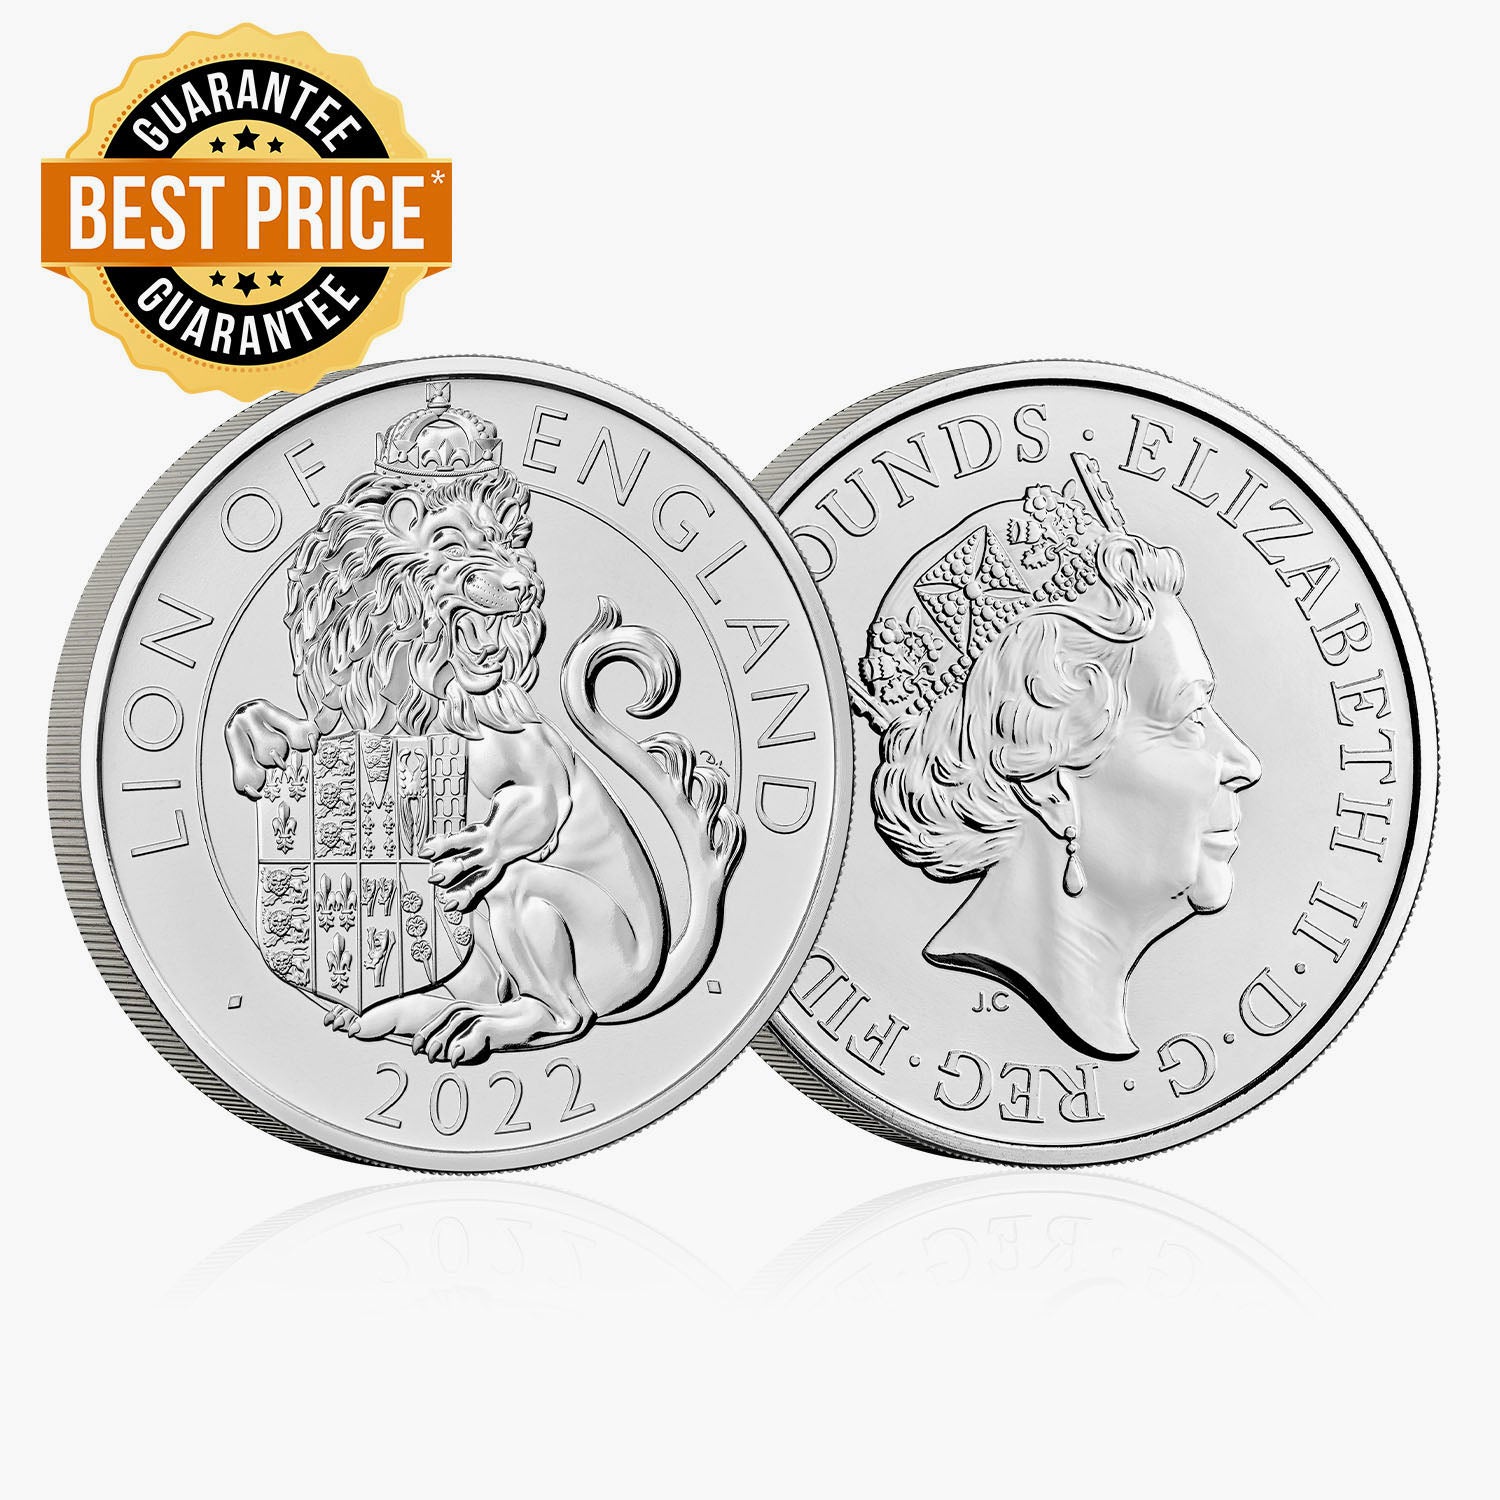 The 2022 Lion of England £5 Brilliant Uncirculated Coin